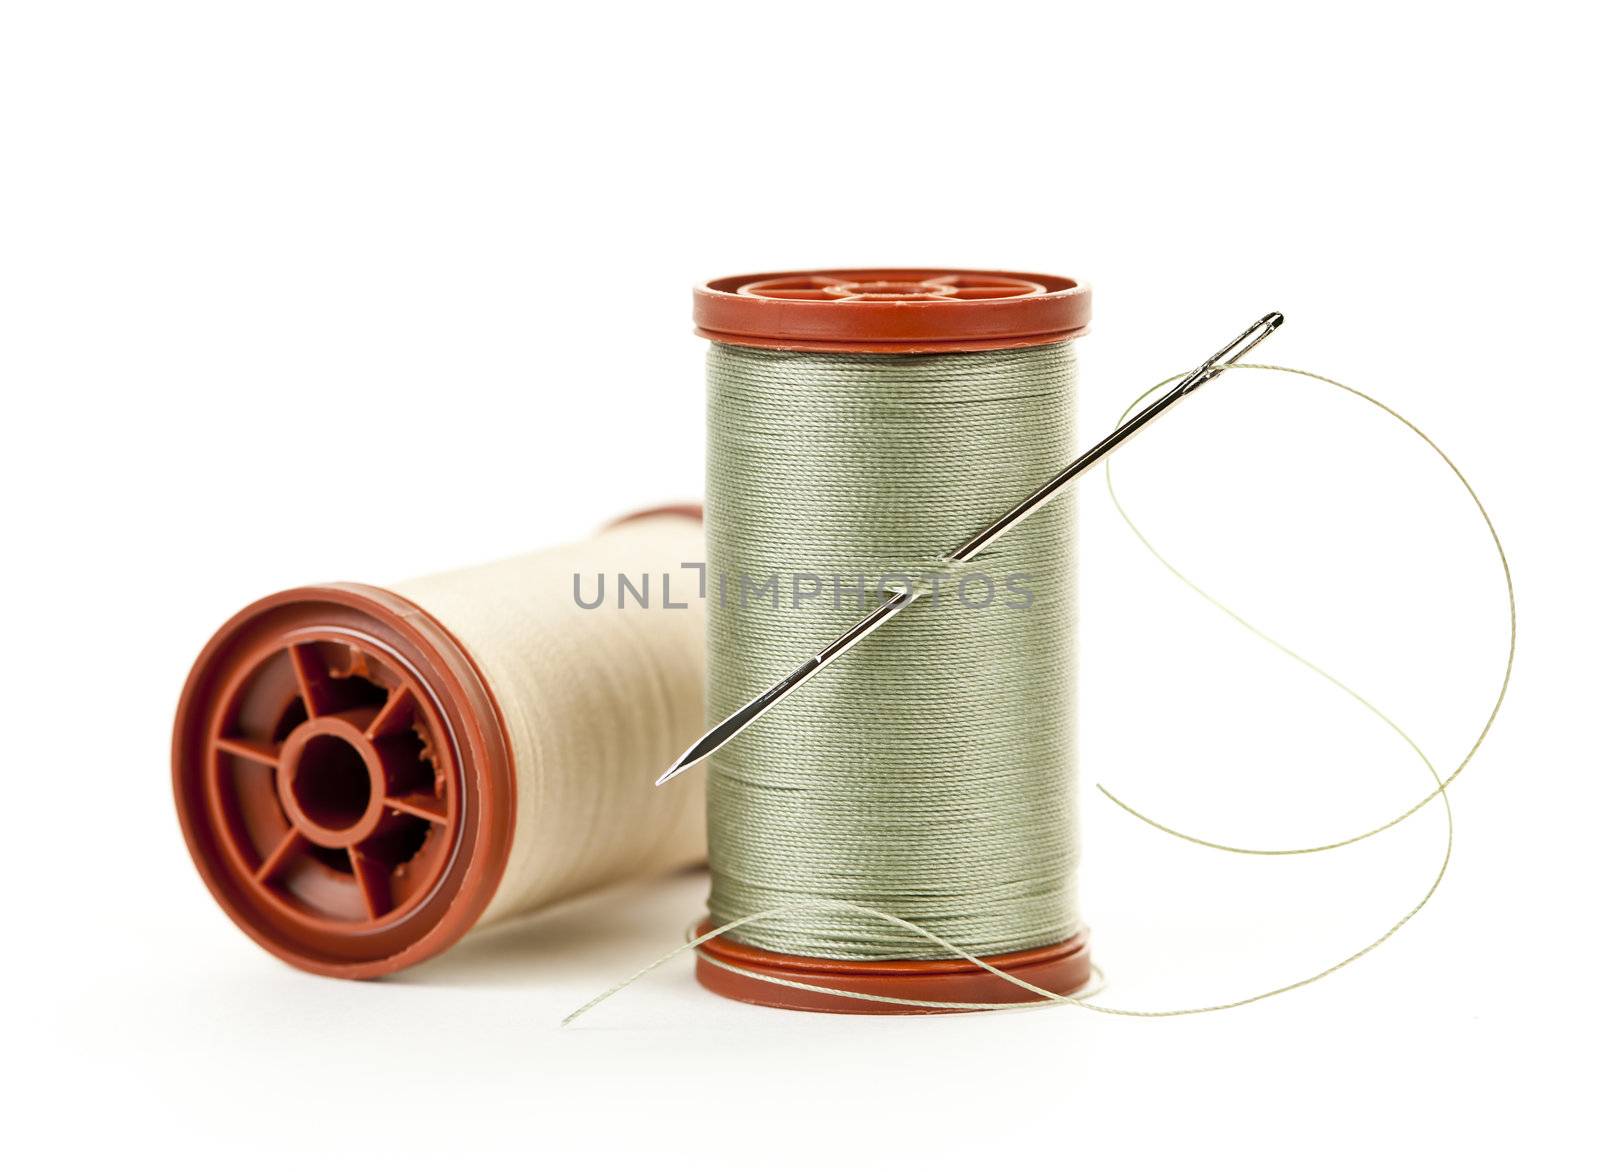 Spools of thread by elenathewise